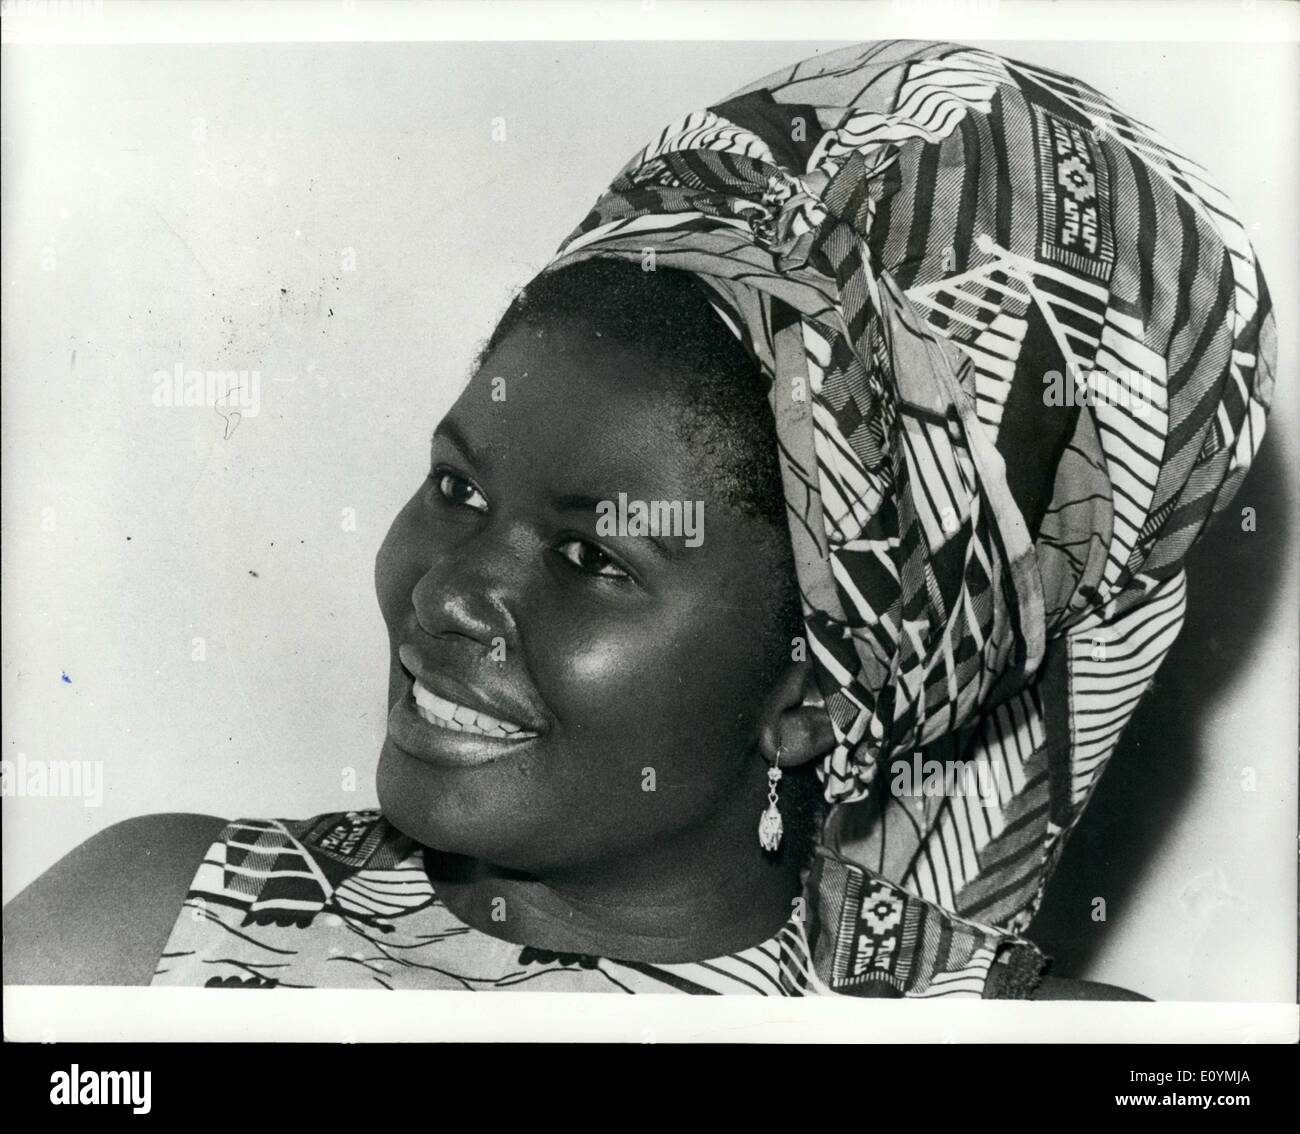 Oct. 10, 1970 - Denmark's New Ambassador from Ghana: Denmark has a new Ambassador from Ghana and a very pretty. She is Bertha Amonoo Neizer, mother to four children. She is lawyer from the London School of Economies and of royal bleed belonging to the Adenten tribe and the famous Ashants people, where her grandmother has the title; The Queen Mother, Bertha Amonee Neizer says that the women of Ghana have the same equal rights and salary as men. There is no discrimination's, only qualifications court. Women have a big part in building up the nation in public, economical and political life Stock Photo